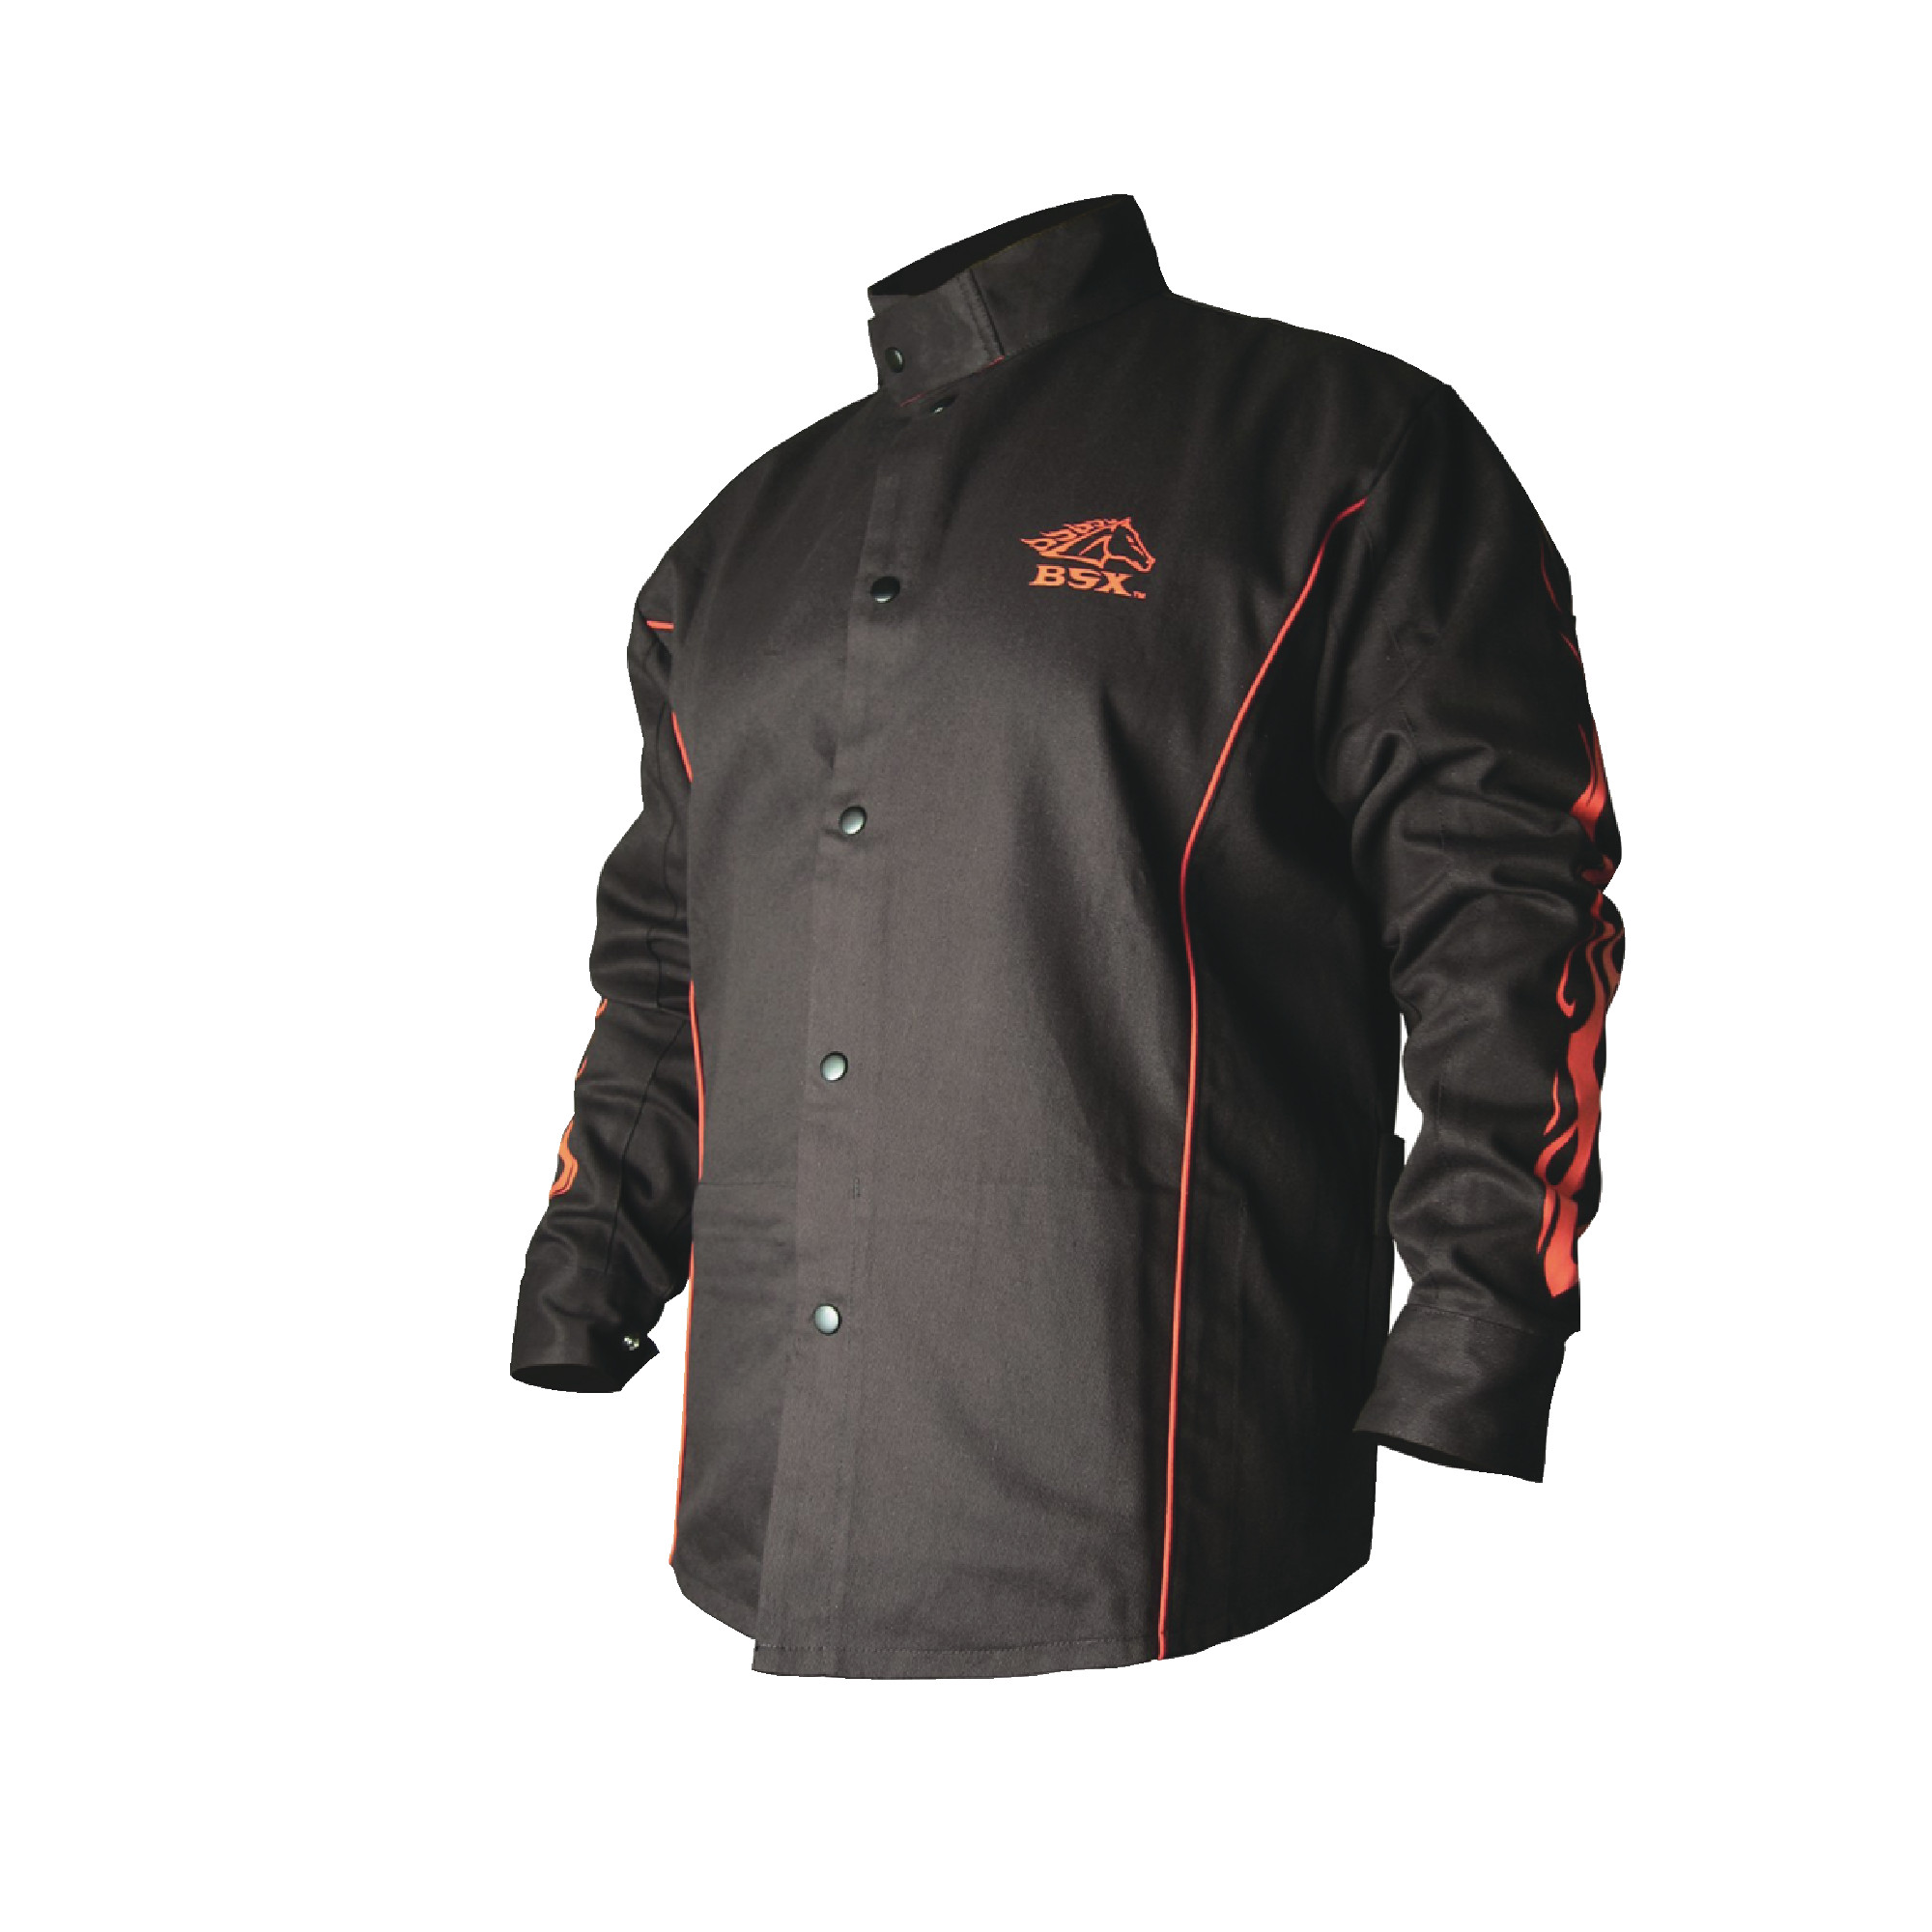 BSX Stryker Black With Red Flames Fire Resistant Welding Jacket - Size M